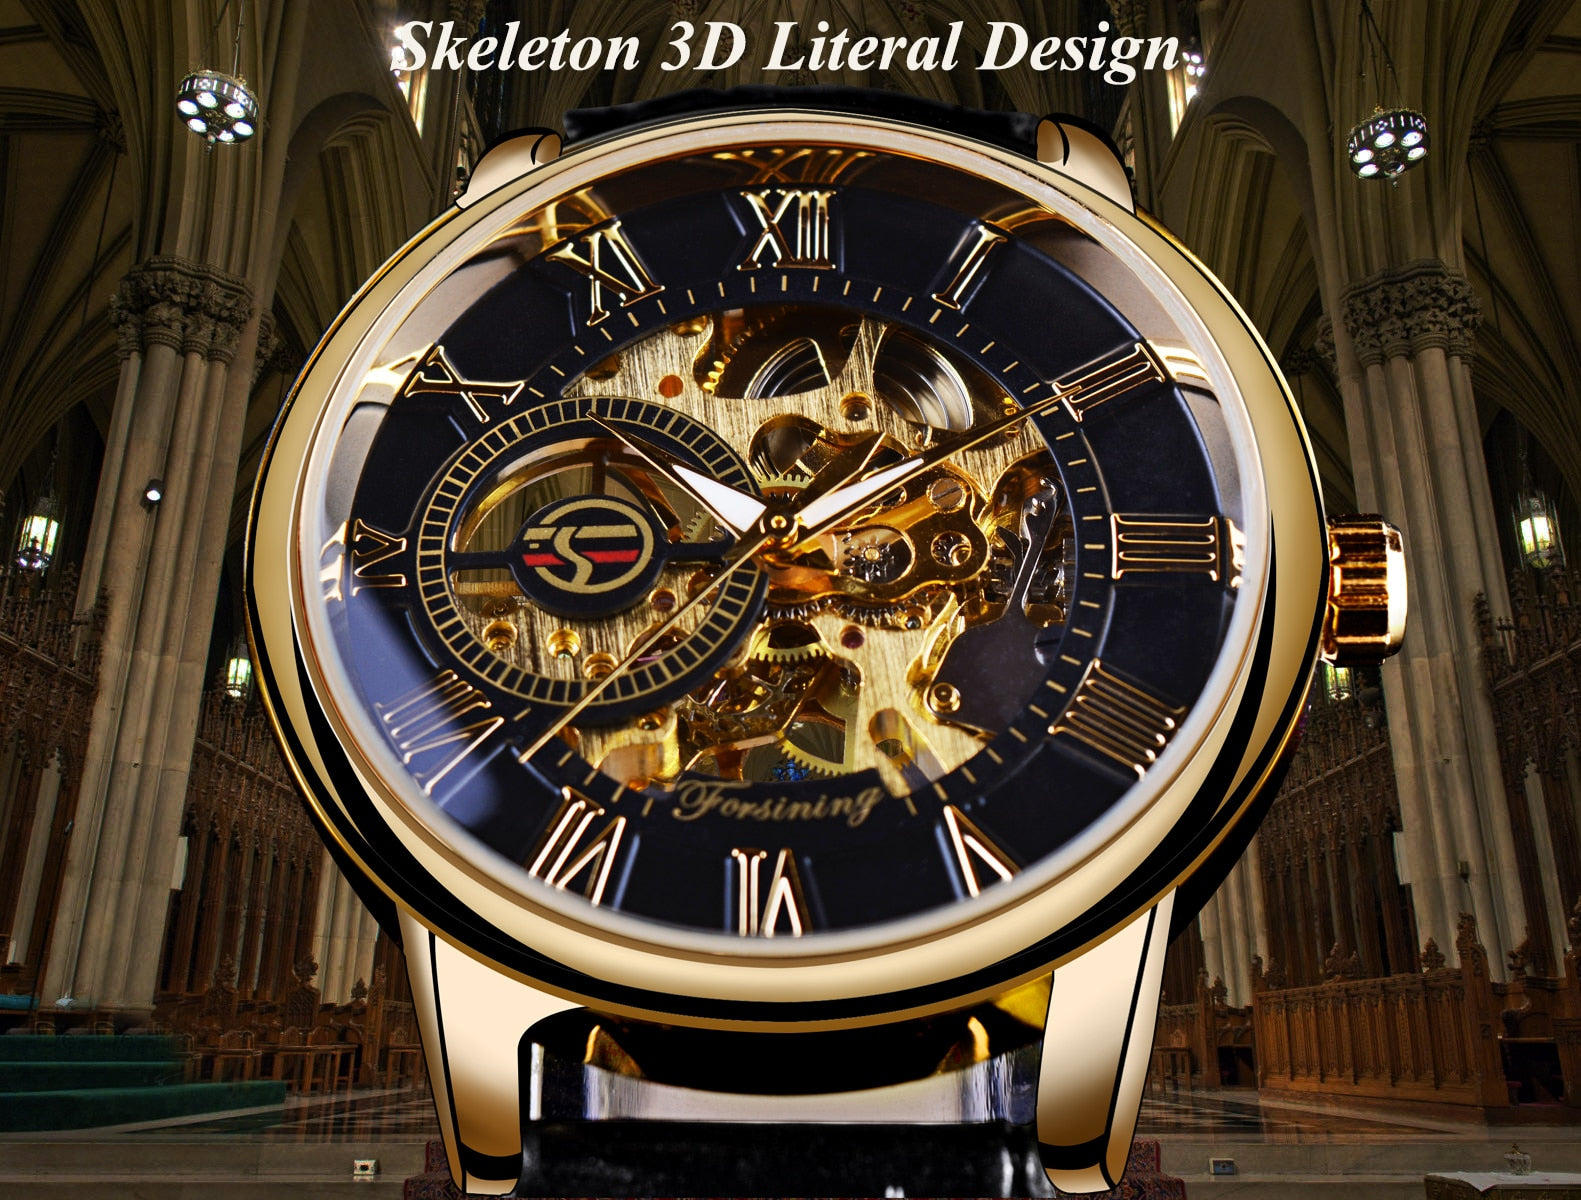 Men's Luxury Brand Watch - Exquisite Timepiece for Distinctive Style and Precision